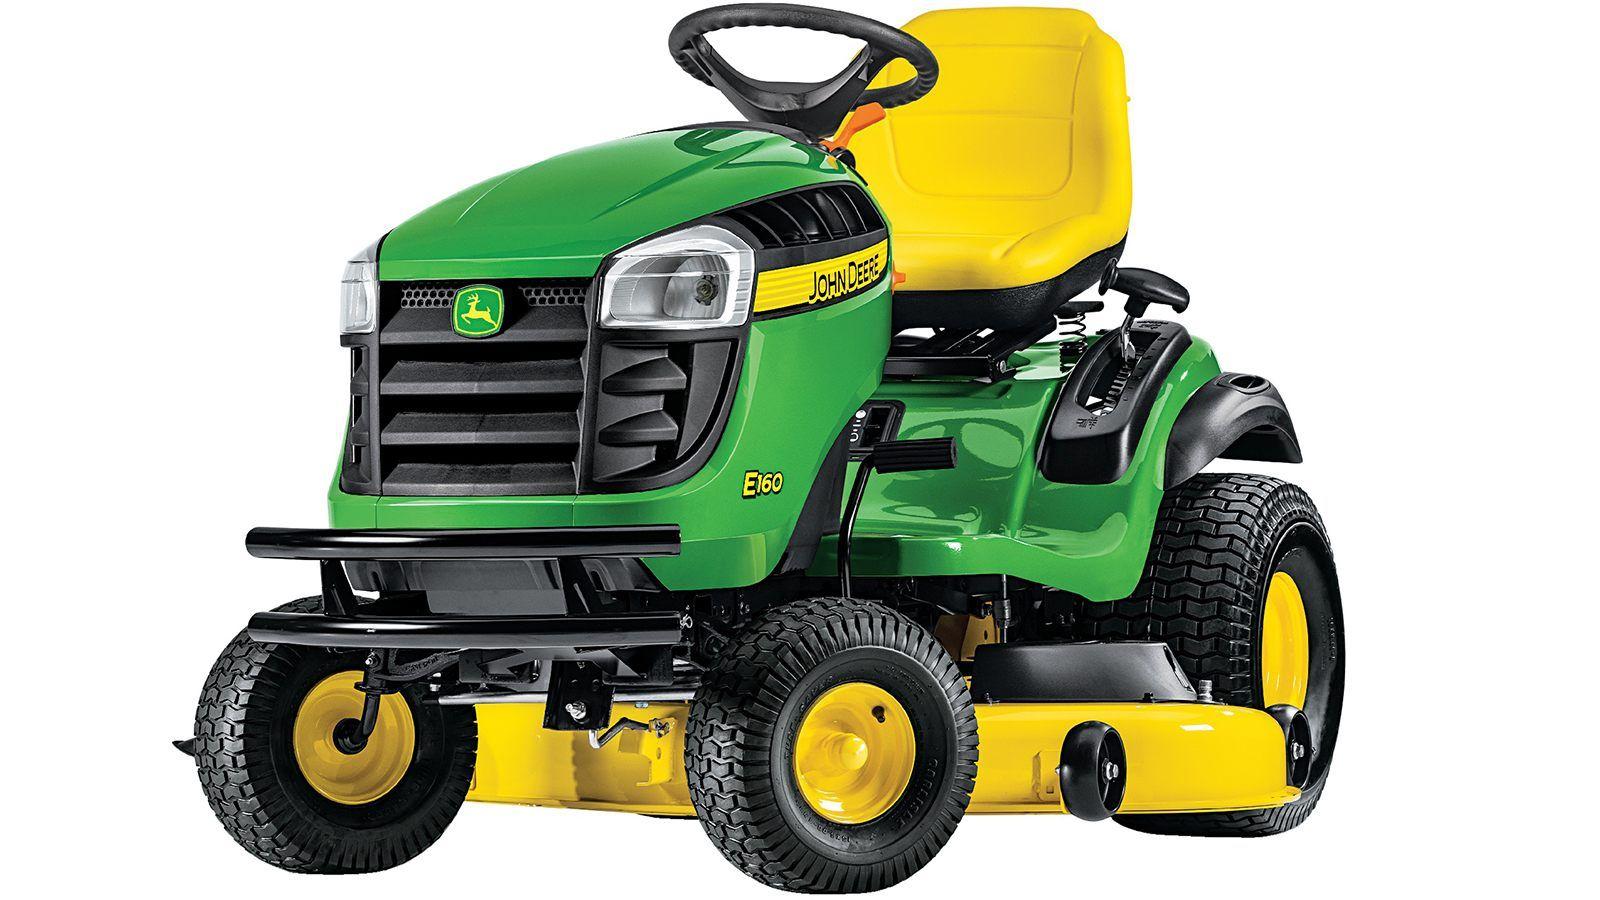 2018 John Deere Logo - John Deere Provides Comfort and Ease of Use with New Lawn T